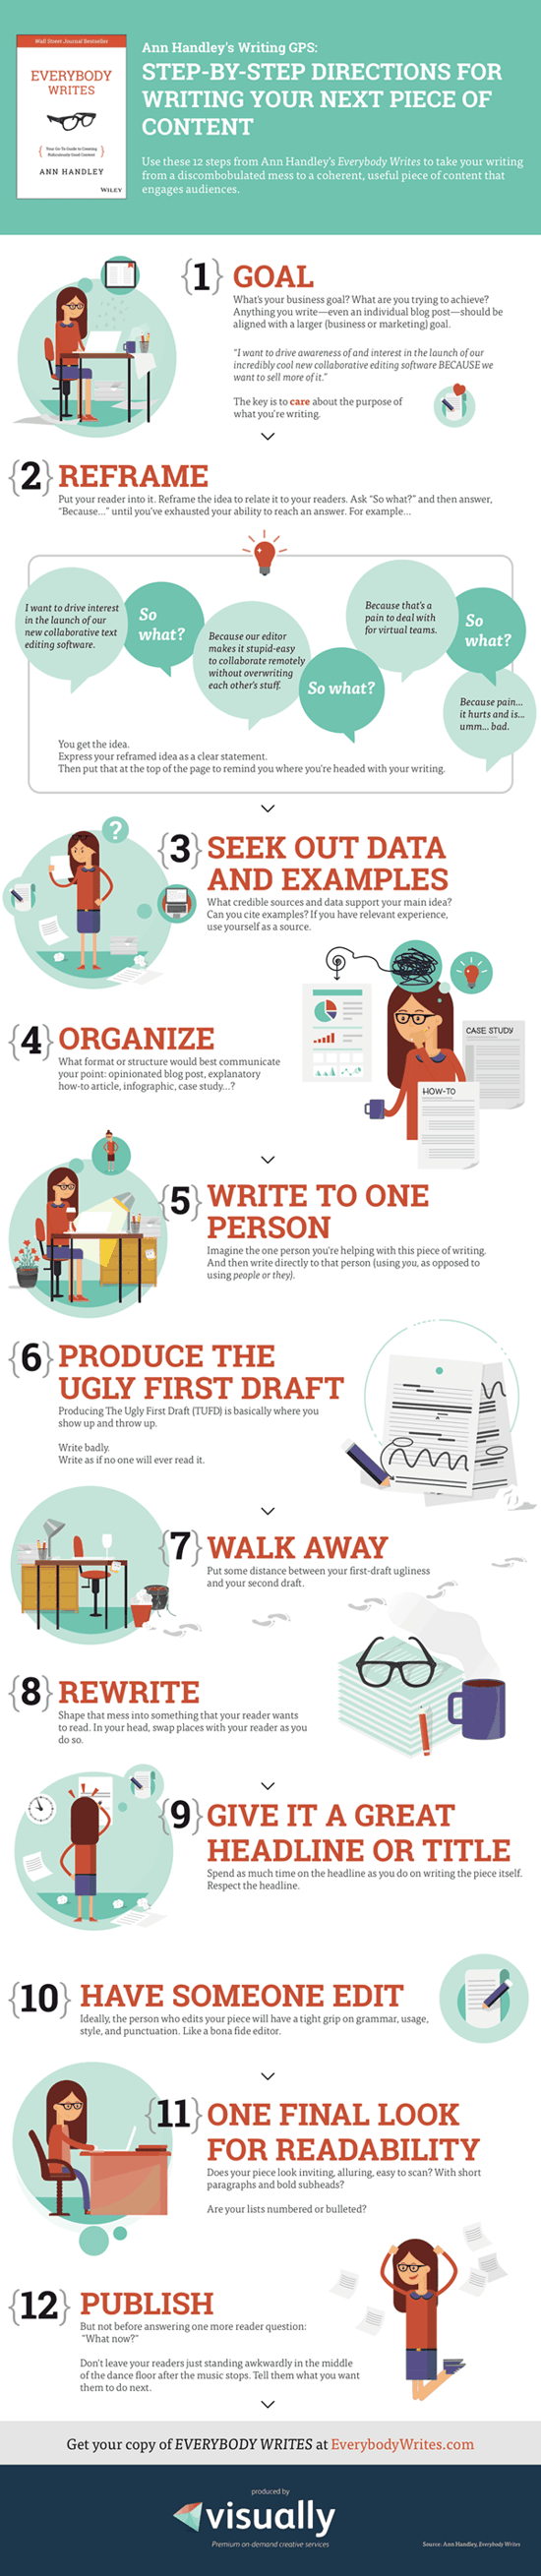 12 Steps To Writing Content That is Great